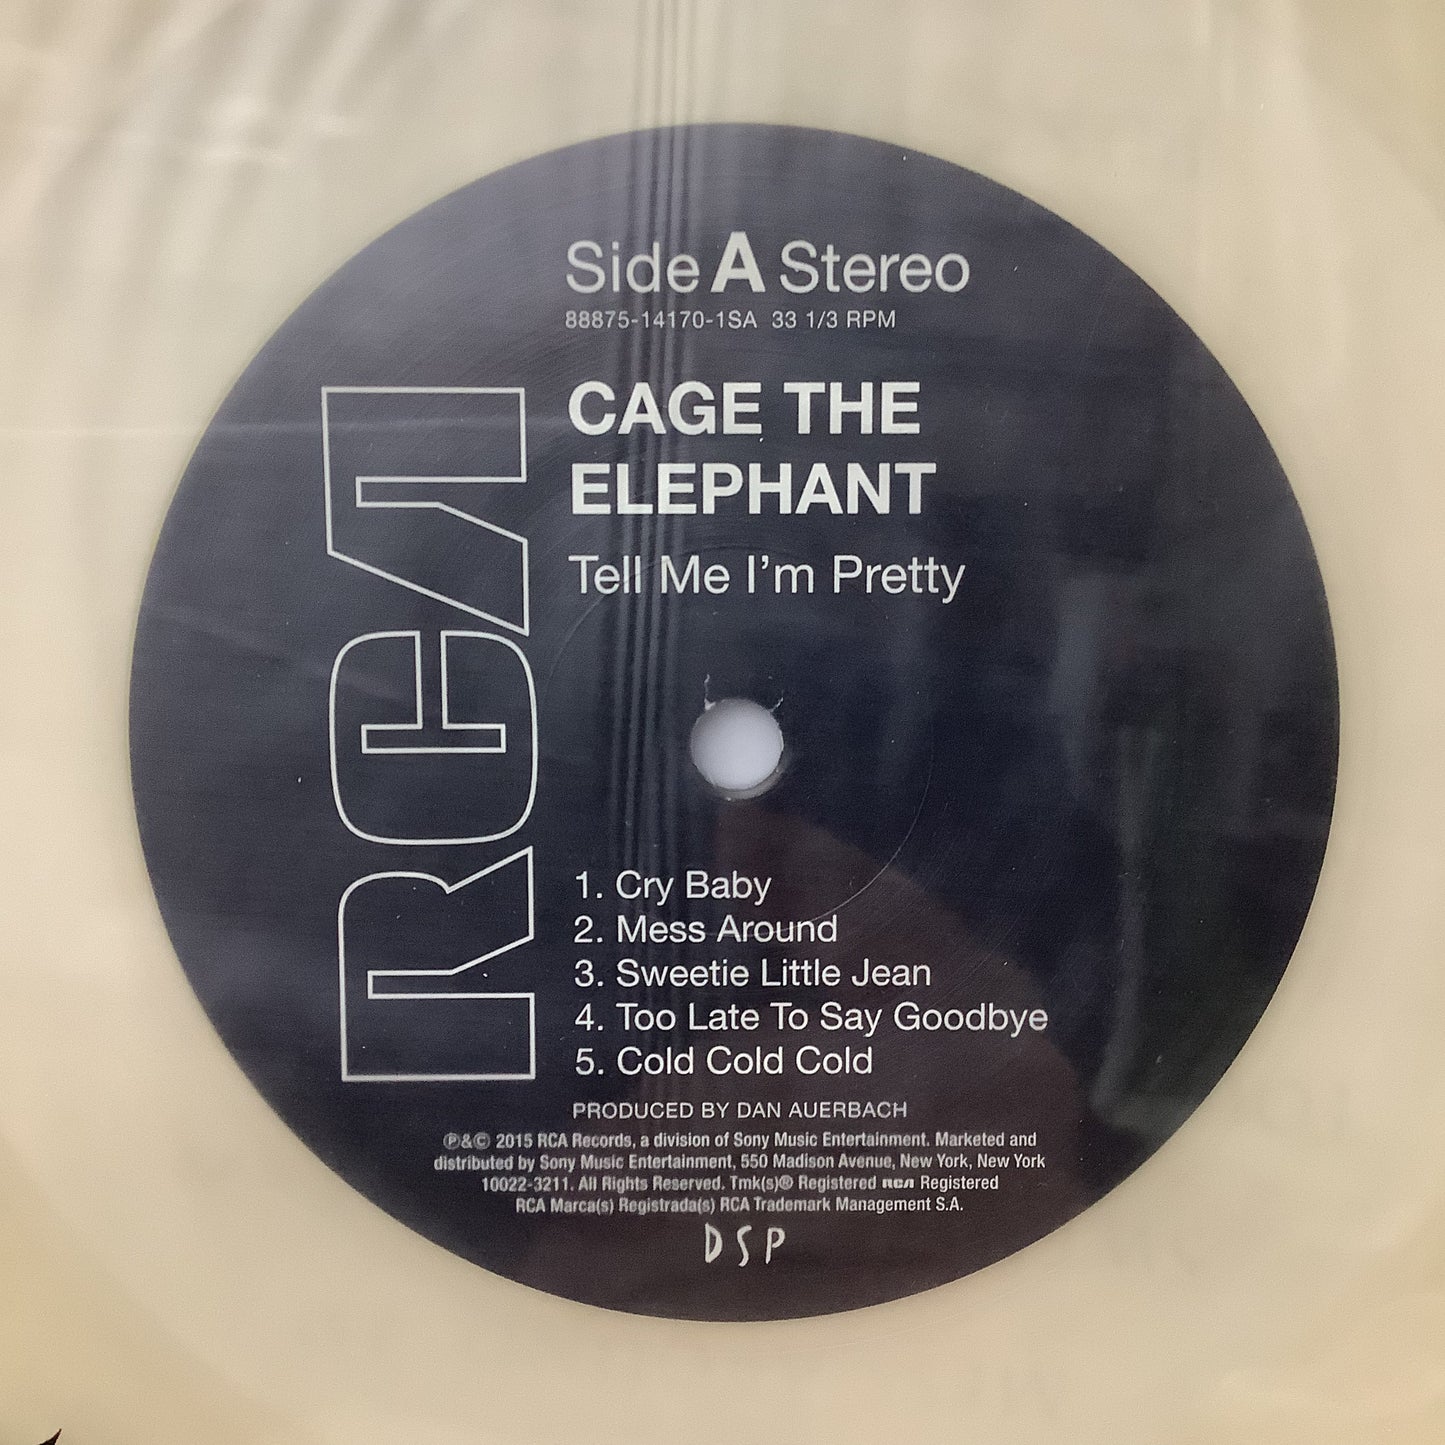 Cage the Elephant - Tell Me I'm Pretty - Limited Autographed Bundle LP/CD